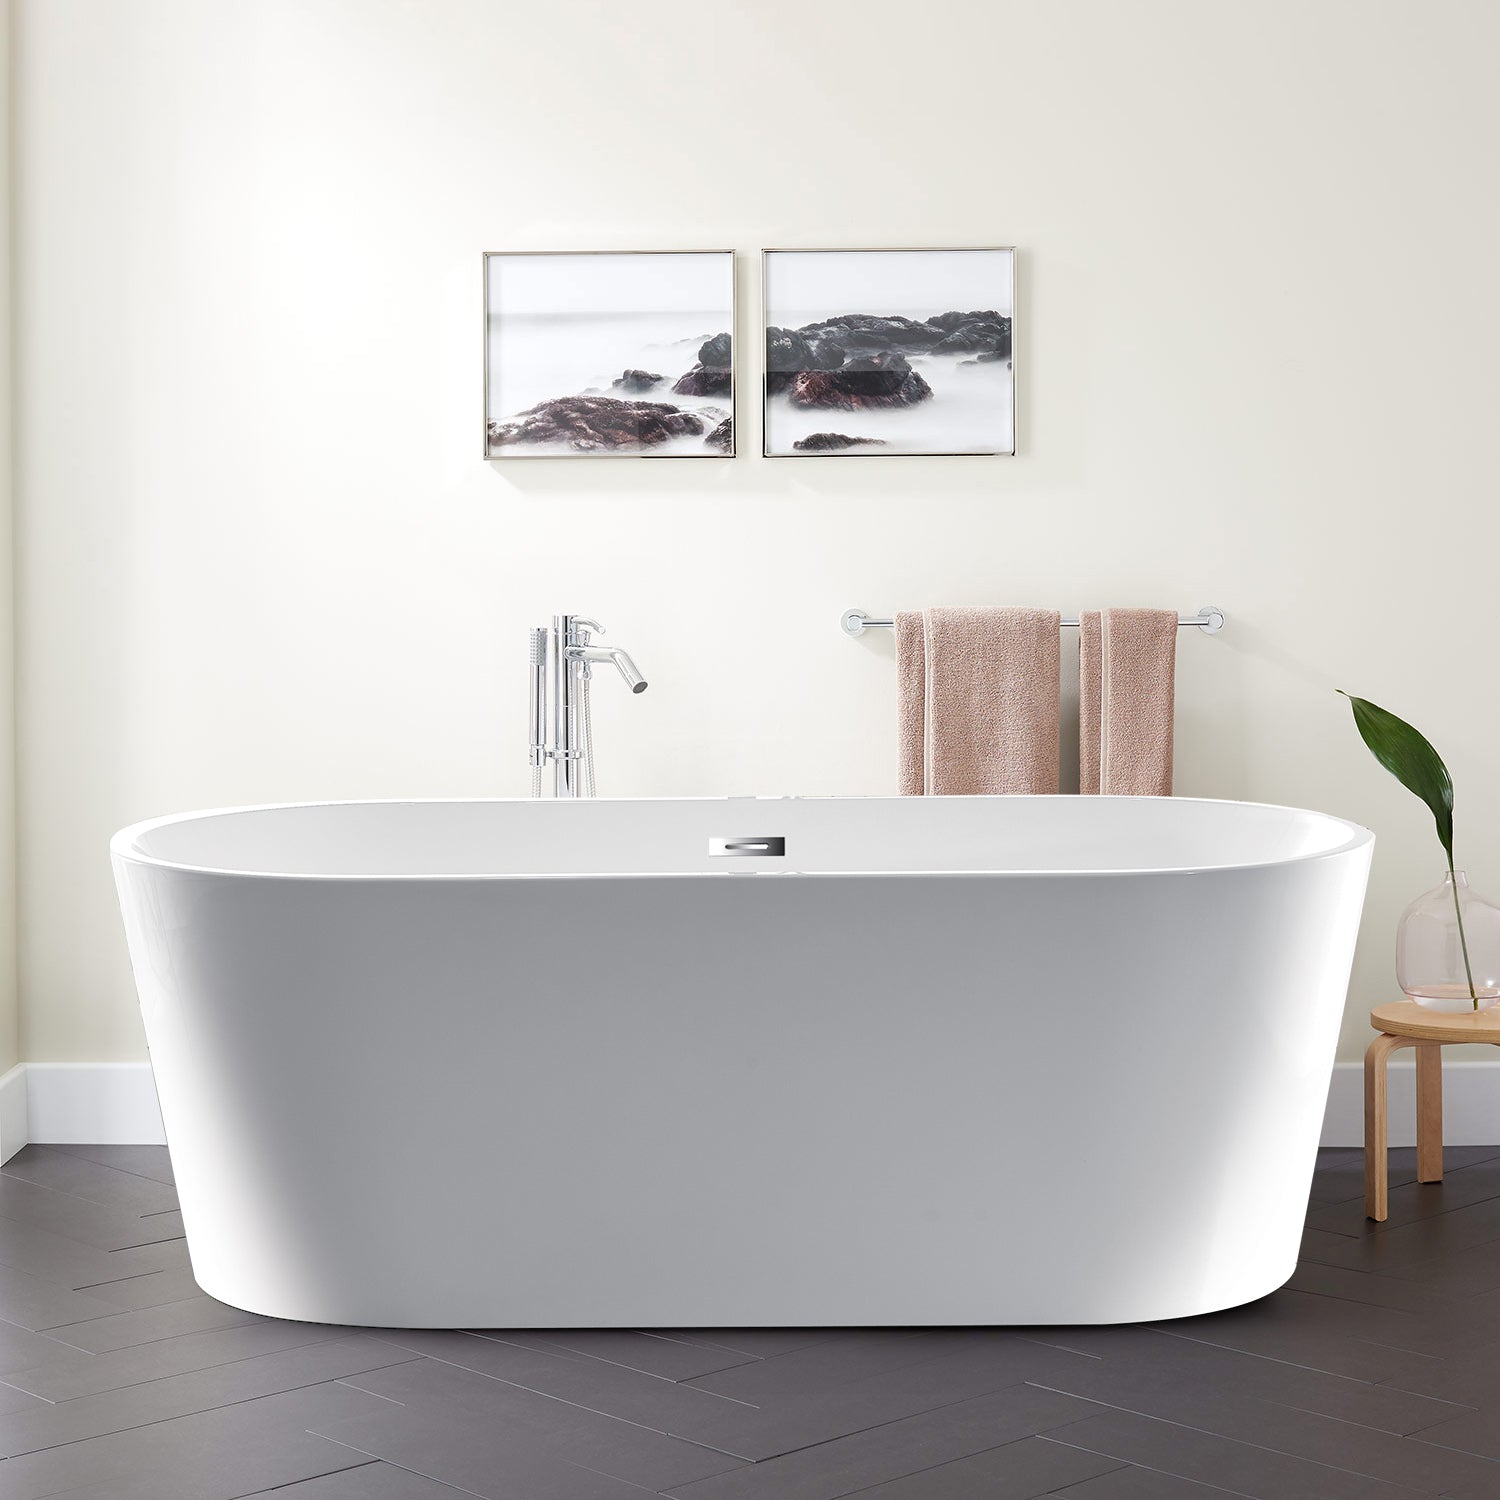 59" 100% Acrylic Freestanding Bathtub Contemporary Soaking Tub with Brushed Nickel Overflow and Drain-Boyel Living